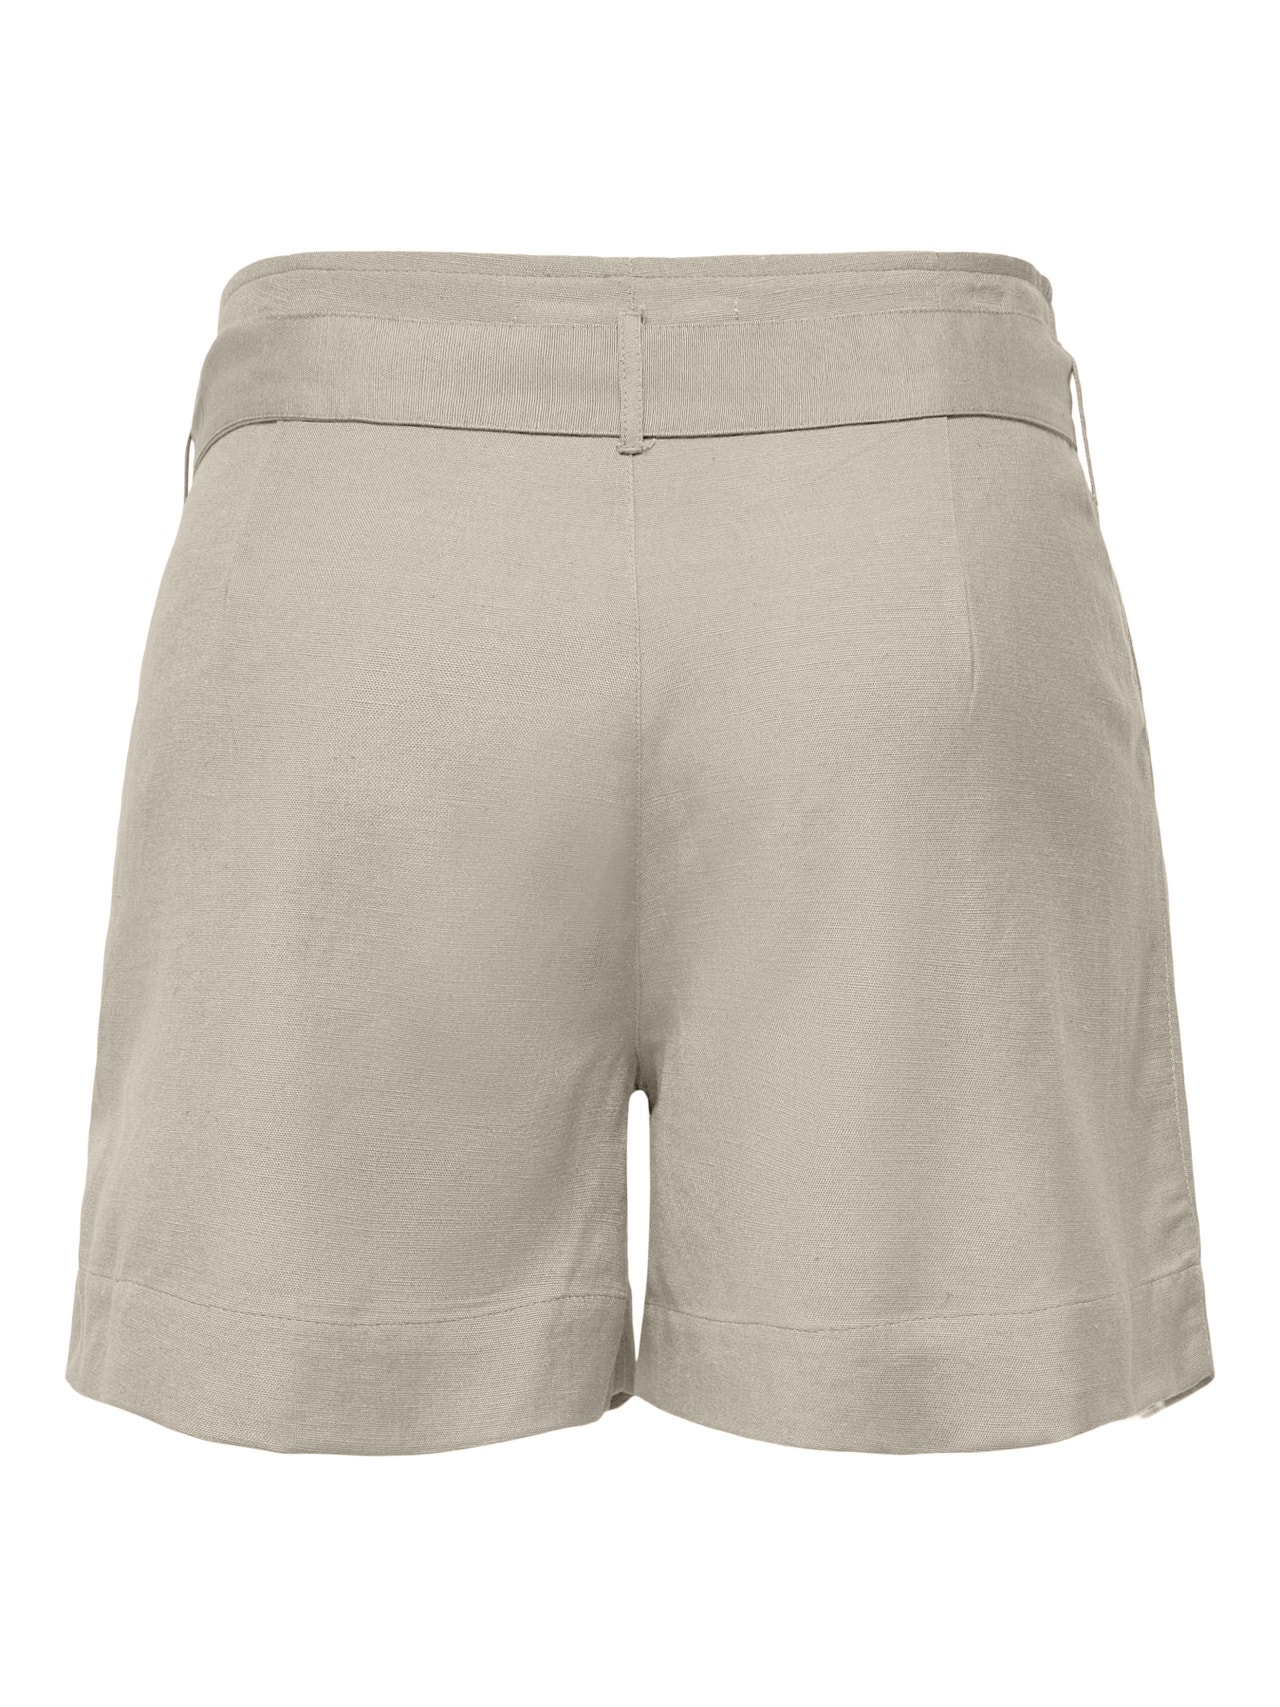 ONLY Komfort Fit Shorts -Silver Lining - 15199801